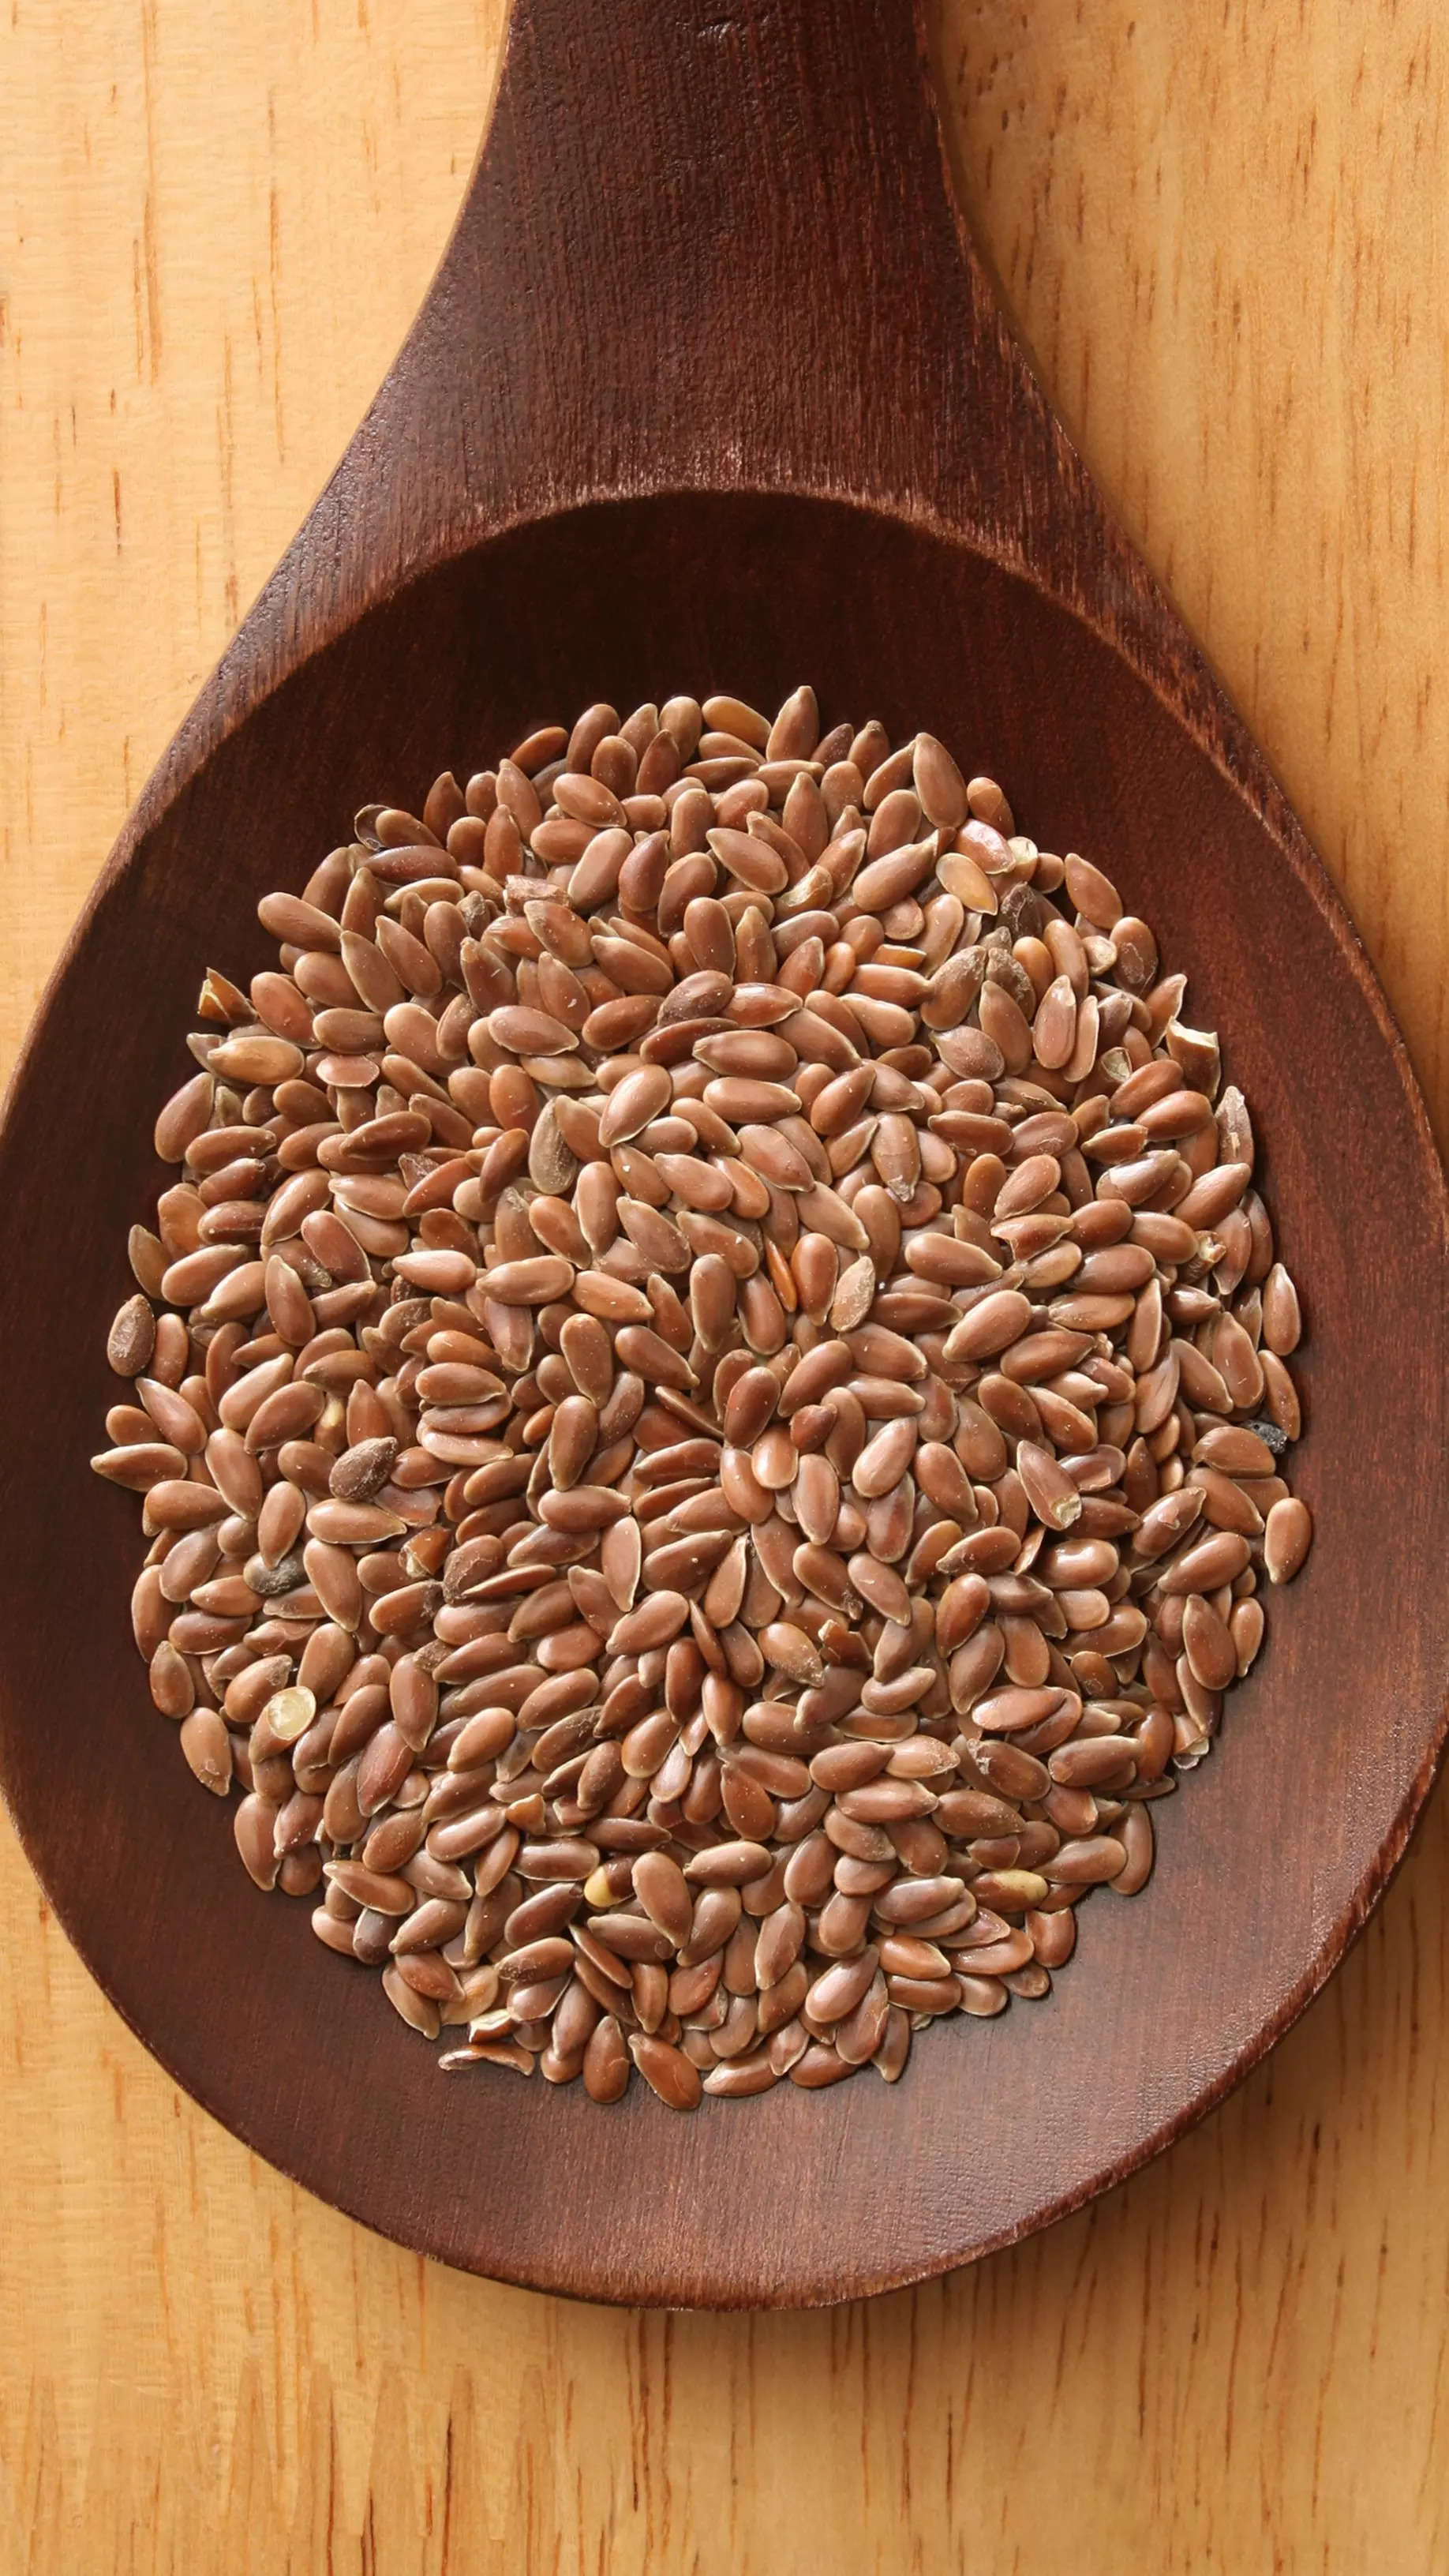 Benefits of using flaxseed on skin and hair | EconomicTimes